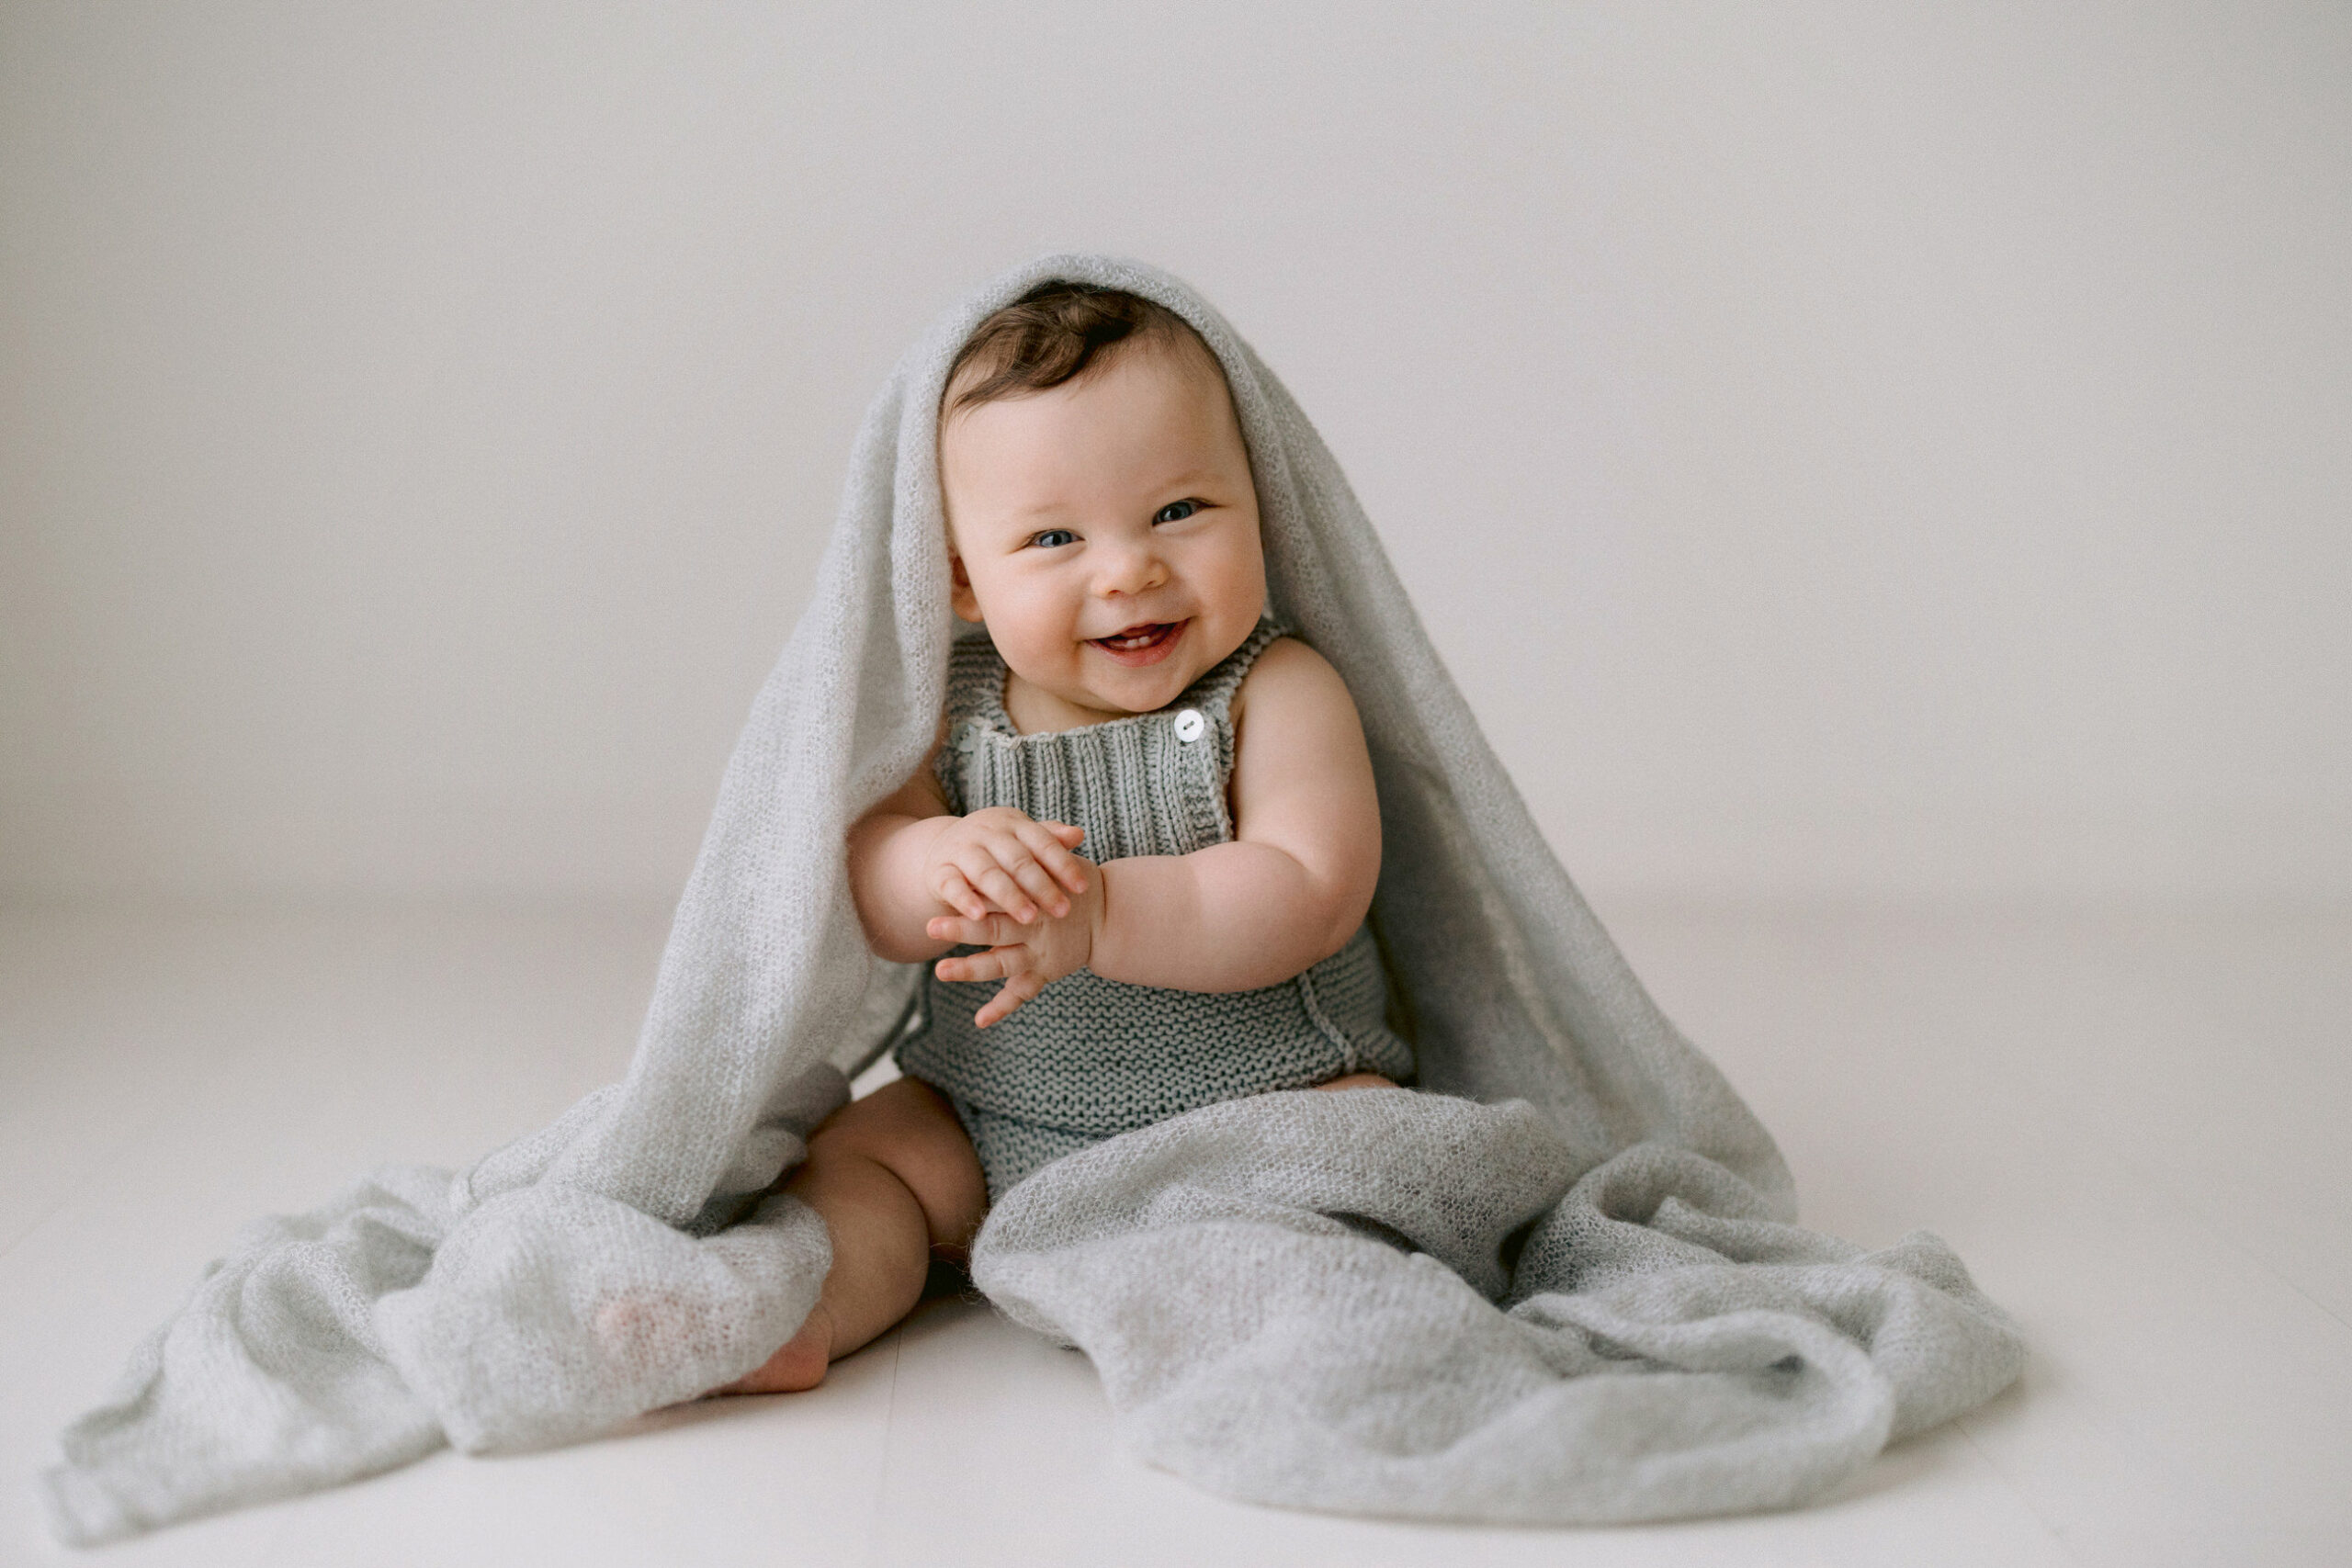 Lots of fun and giggles to be had during baby photography sessions with Kristen Cook